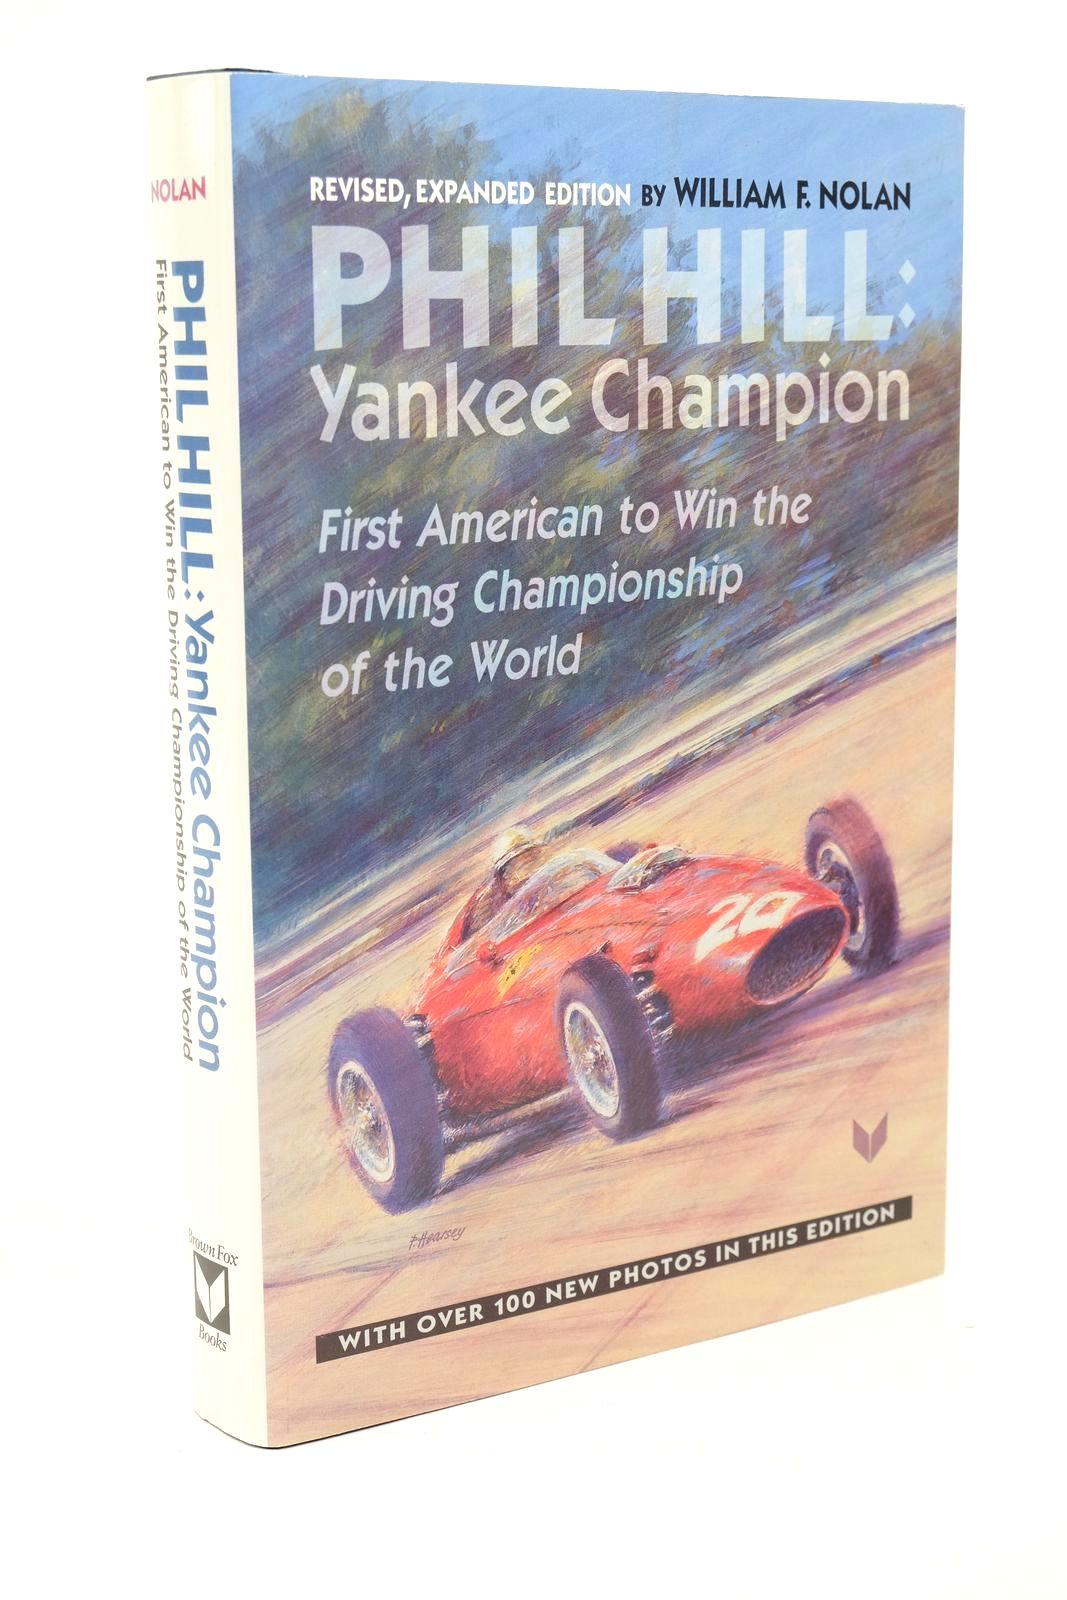 Photo of PHIL HILL YANKEE CHAMPION written by Nolan, William F. published by Brown Fox Books (STOCK CODE: 1323057)  for sale by Stella & Rose's Books